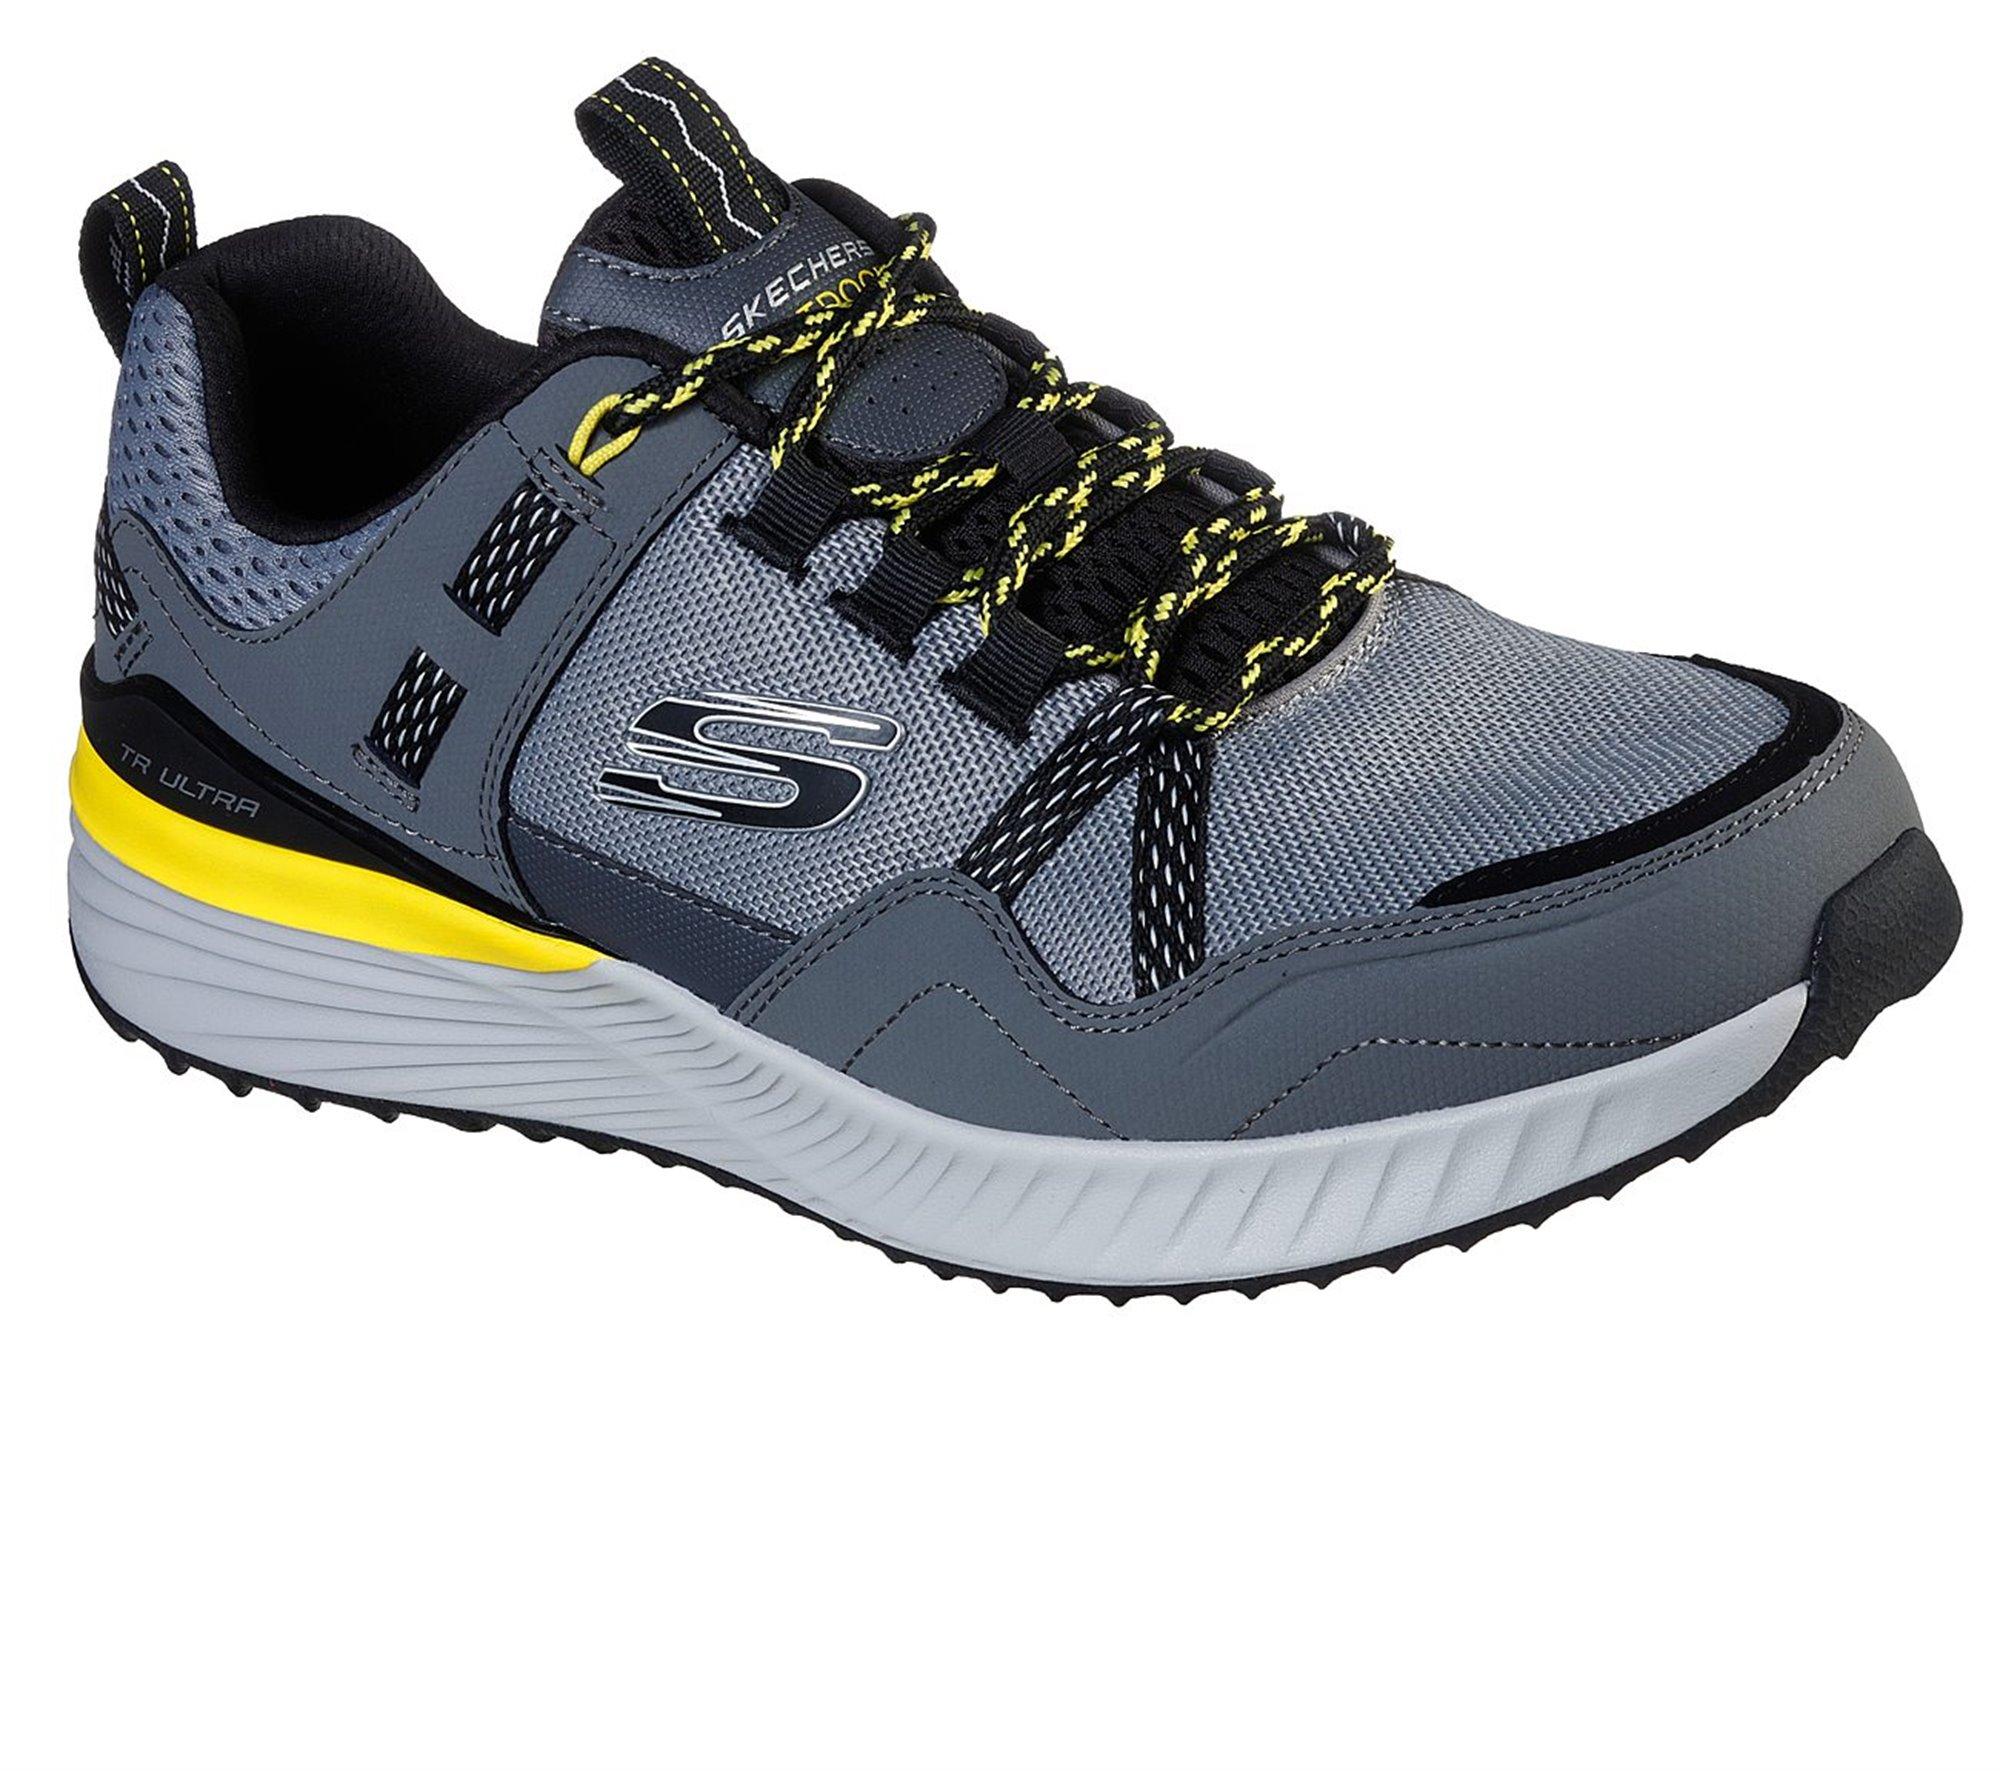 Skechers Leather Tr Ultra in Gray for Men - Save 36% - Lyst